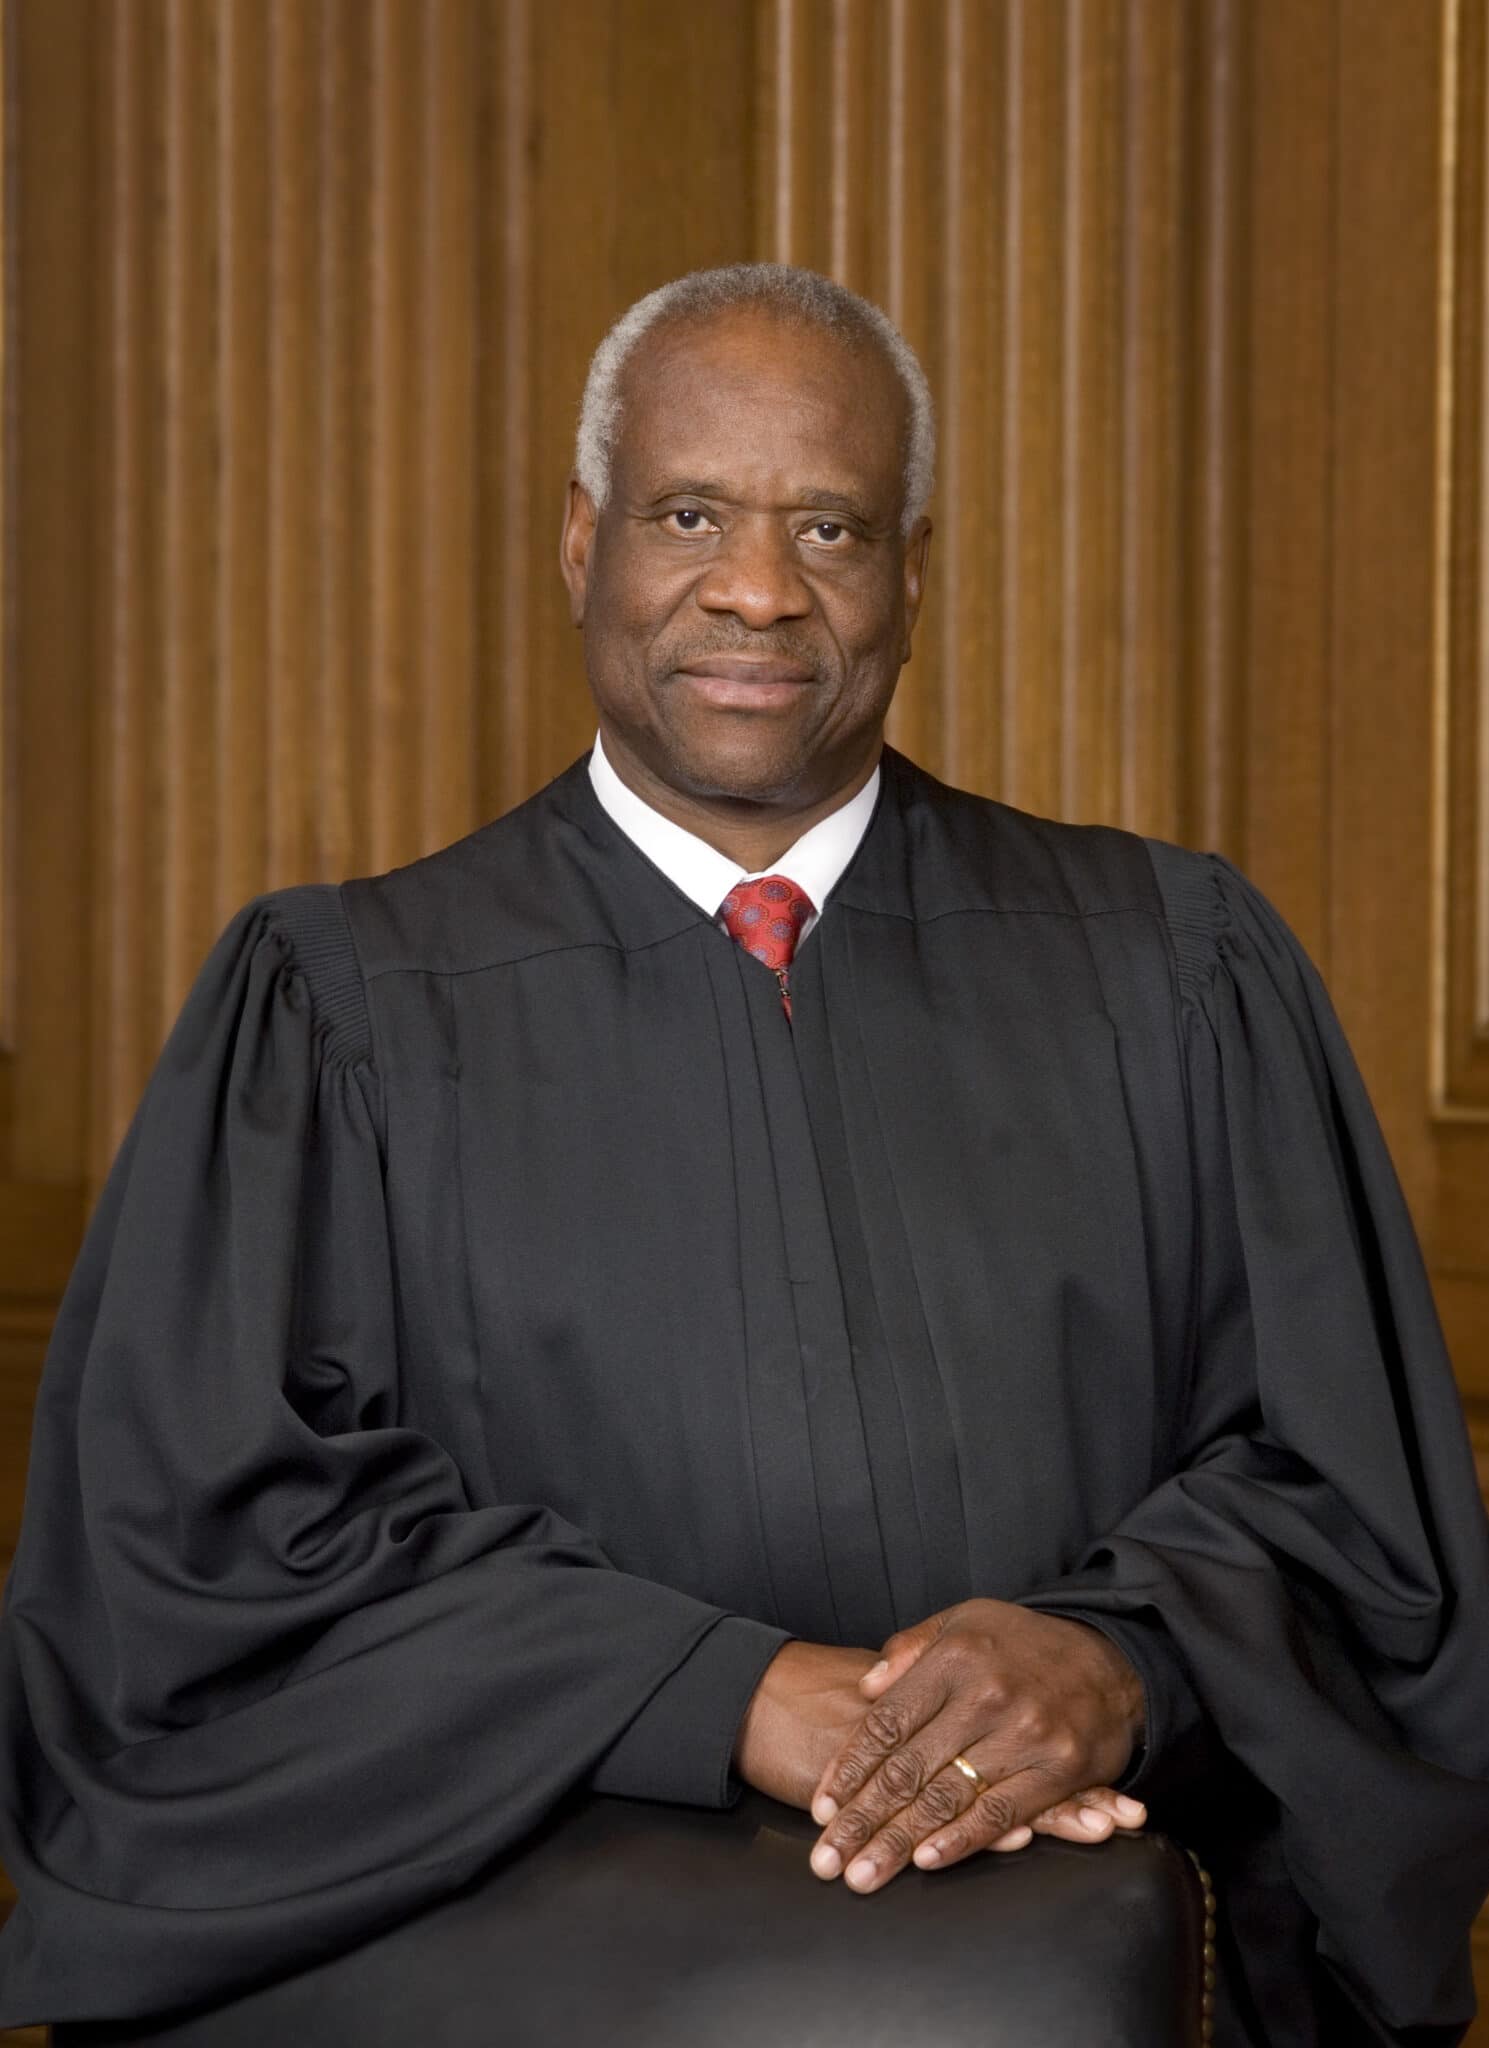 During 'Black History Month' Amazon Blocked Justice Clarence Thomas Documentary